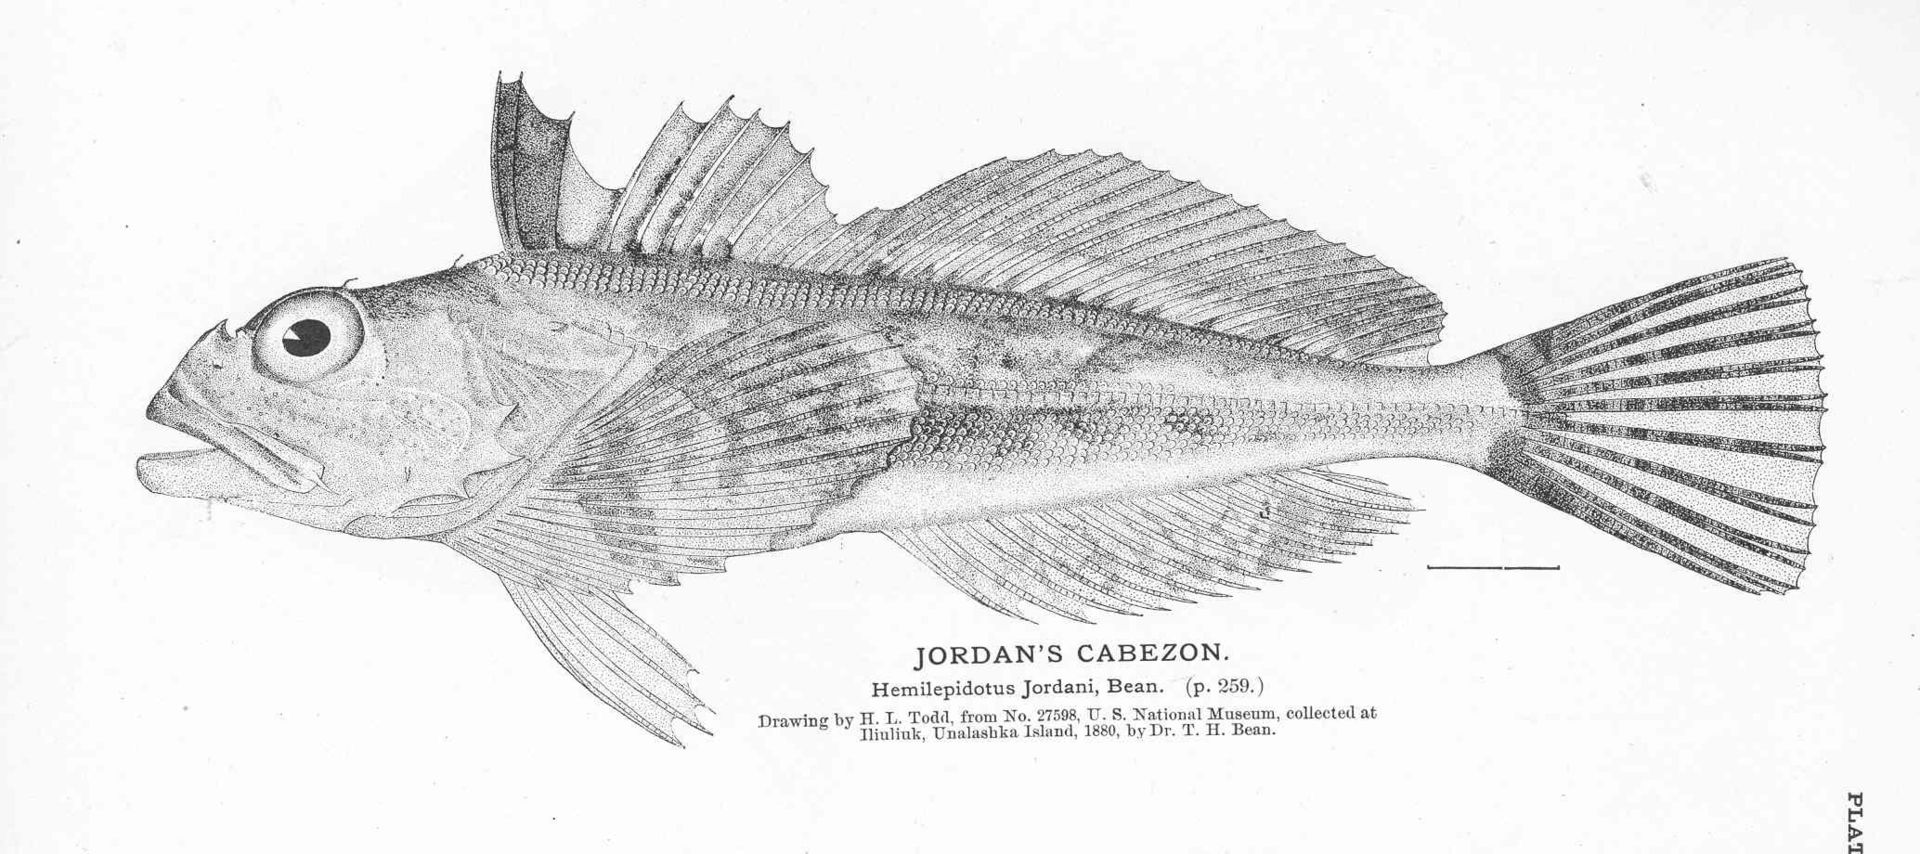 Scorpaenichthys marmoratus (Fisheries and Fishery Industries of the United States: Section I, Natural History of Useful Aquatic Animals)